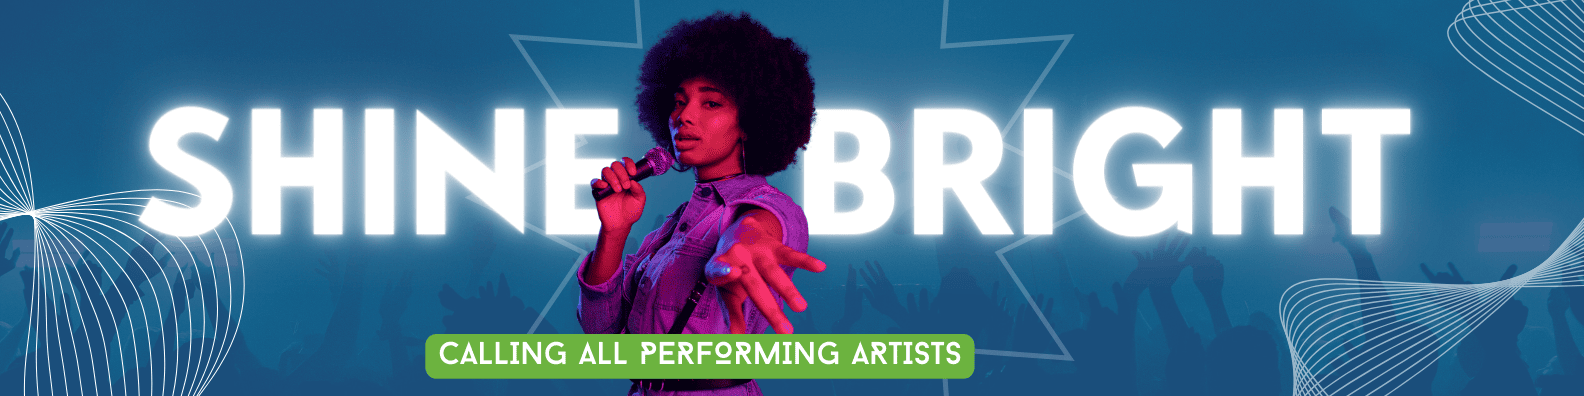 Calling All Performing Artists!